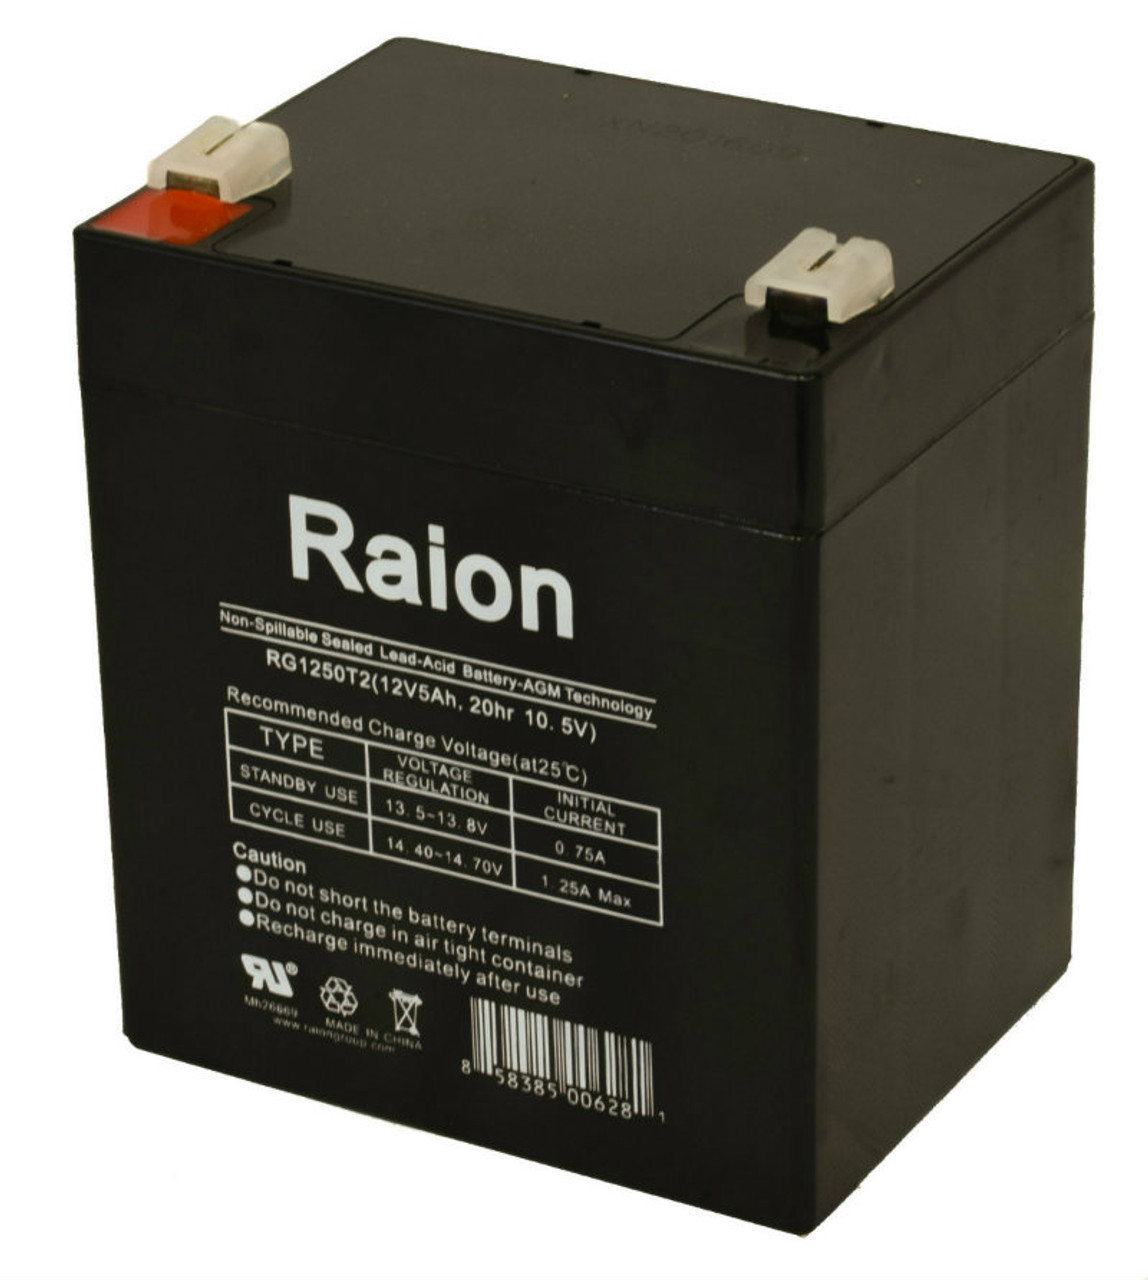 Raion Power 12V 5Ah SLA Battery With T1 Terminals For Celltech CT4.5-12